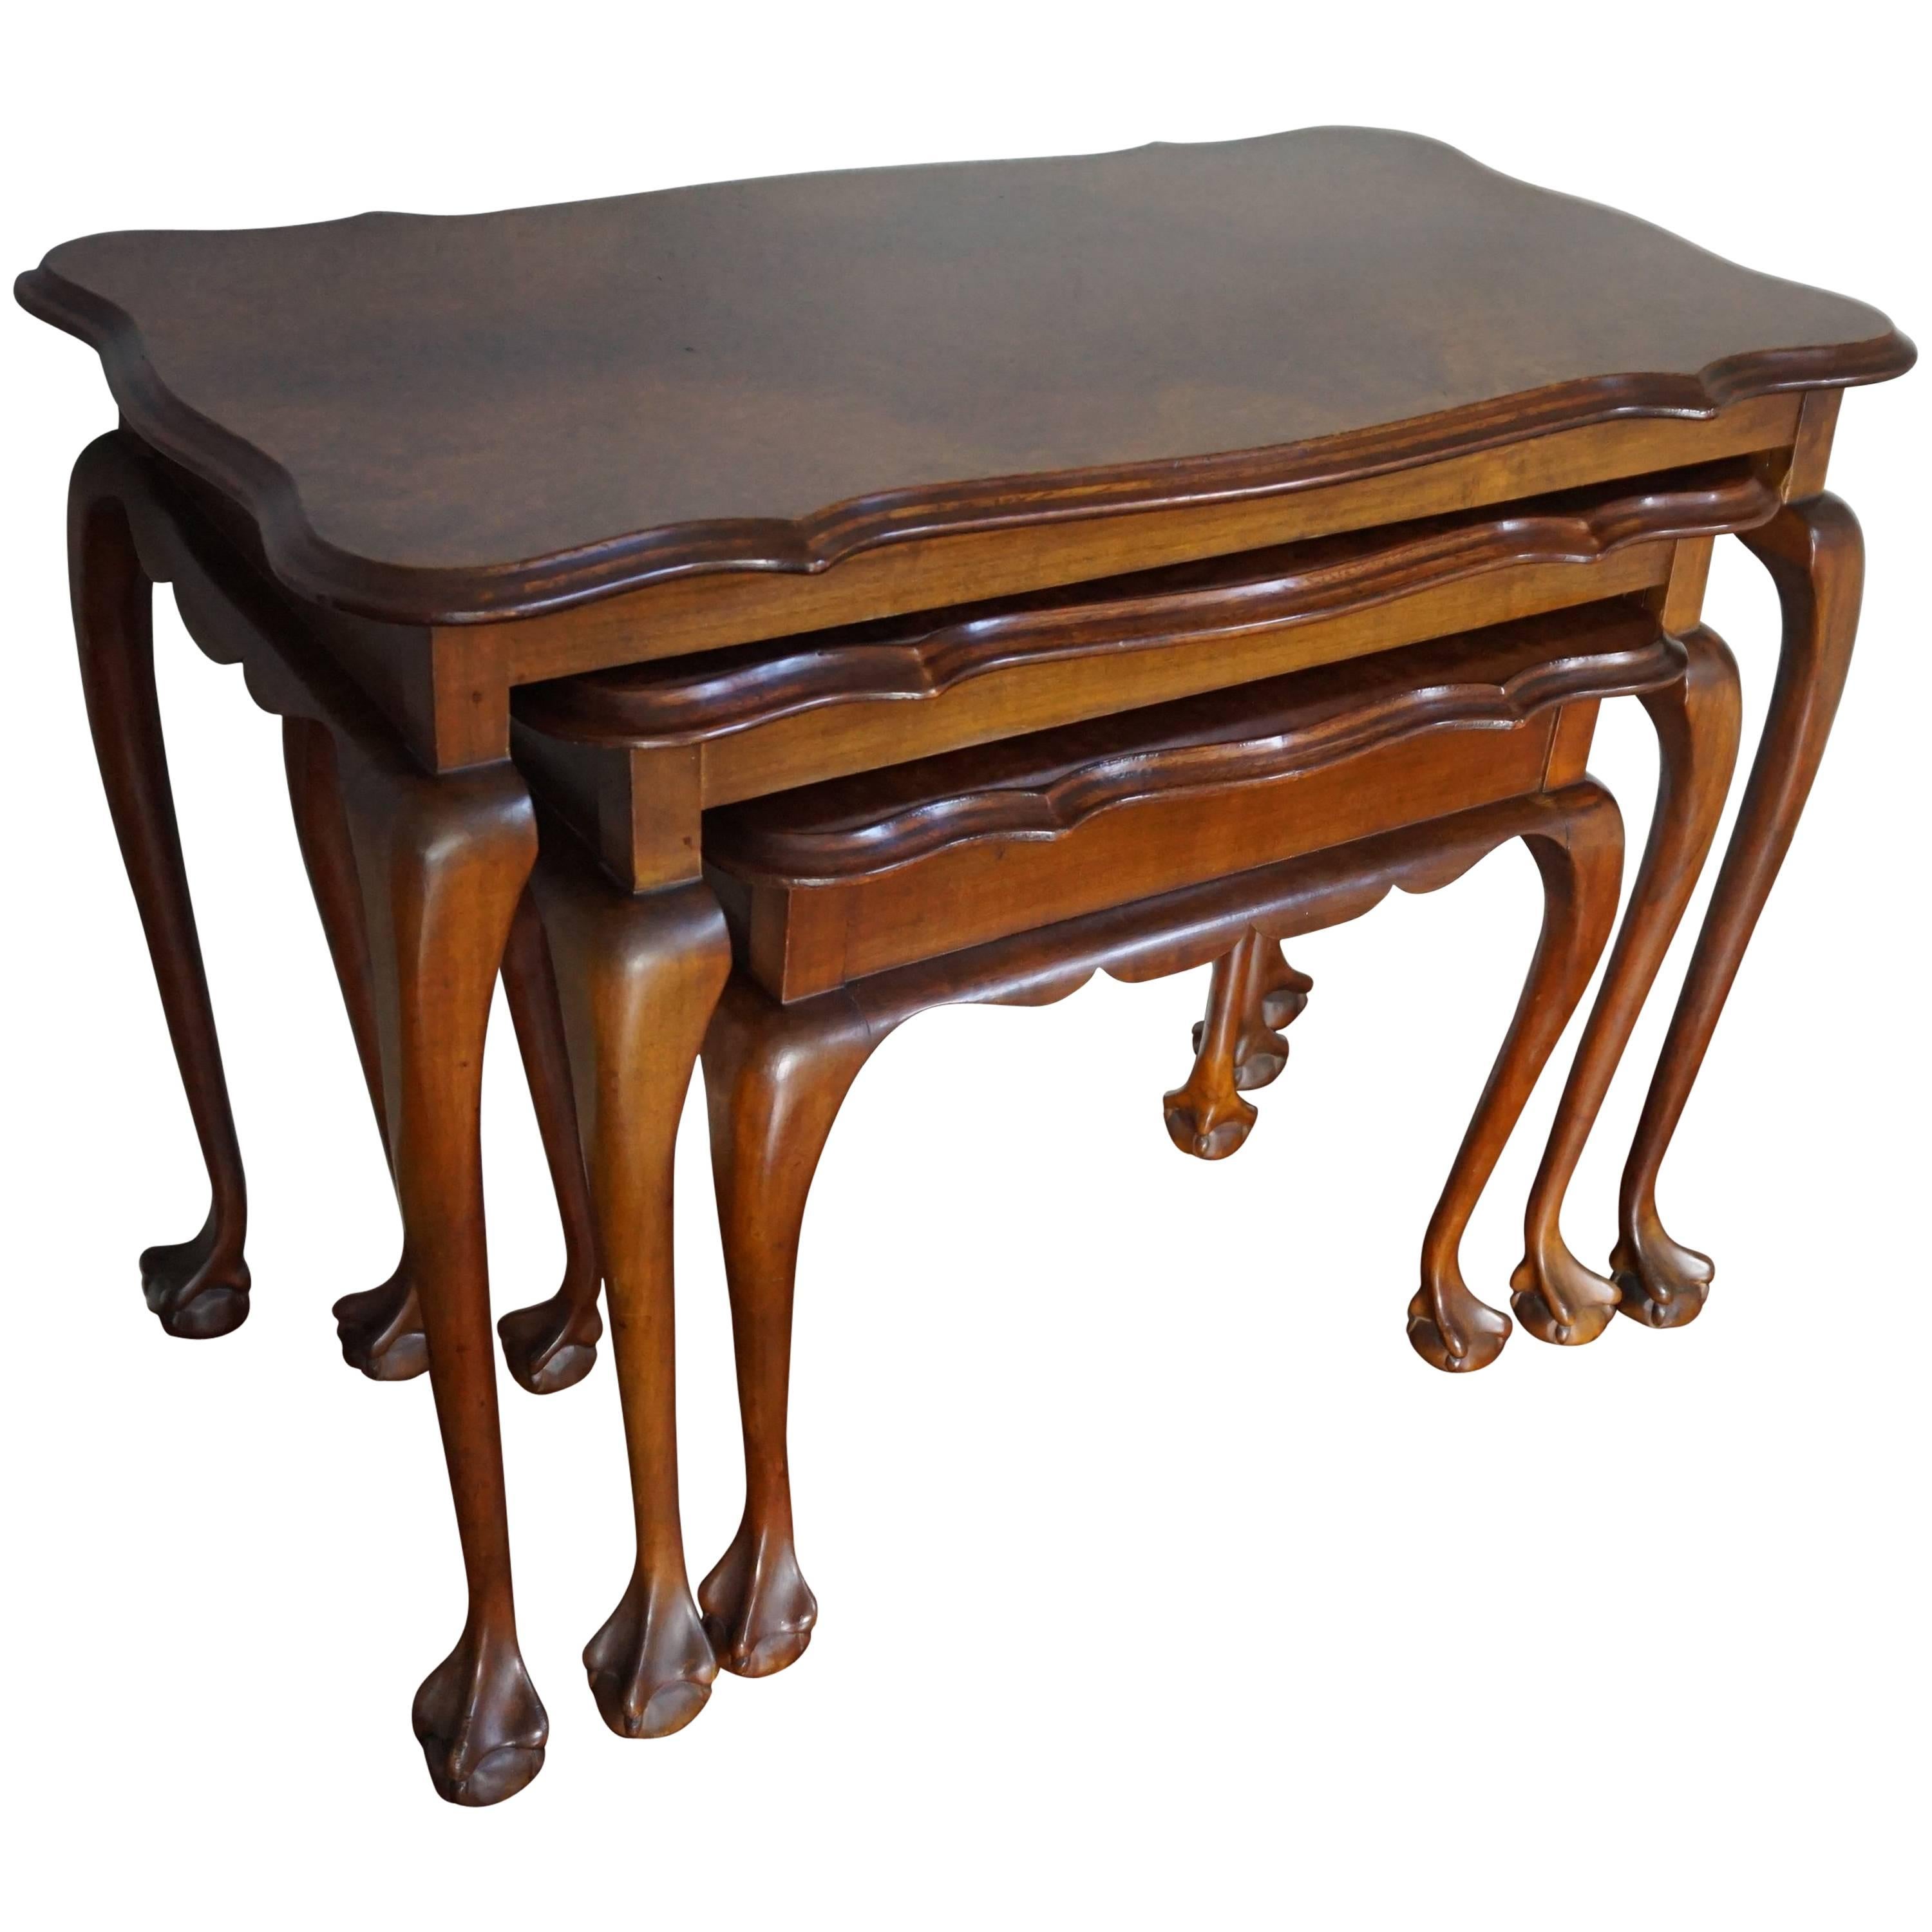 Fine Mid-20th Century Queen Anne Style Nutwood Nest of Tables with Burl Inlay For Sale